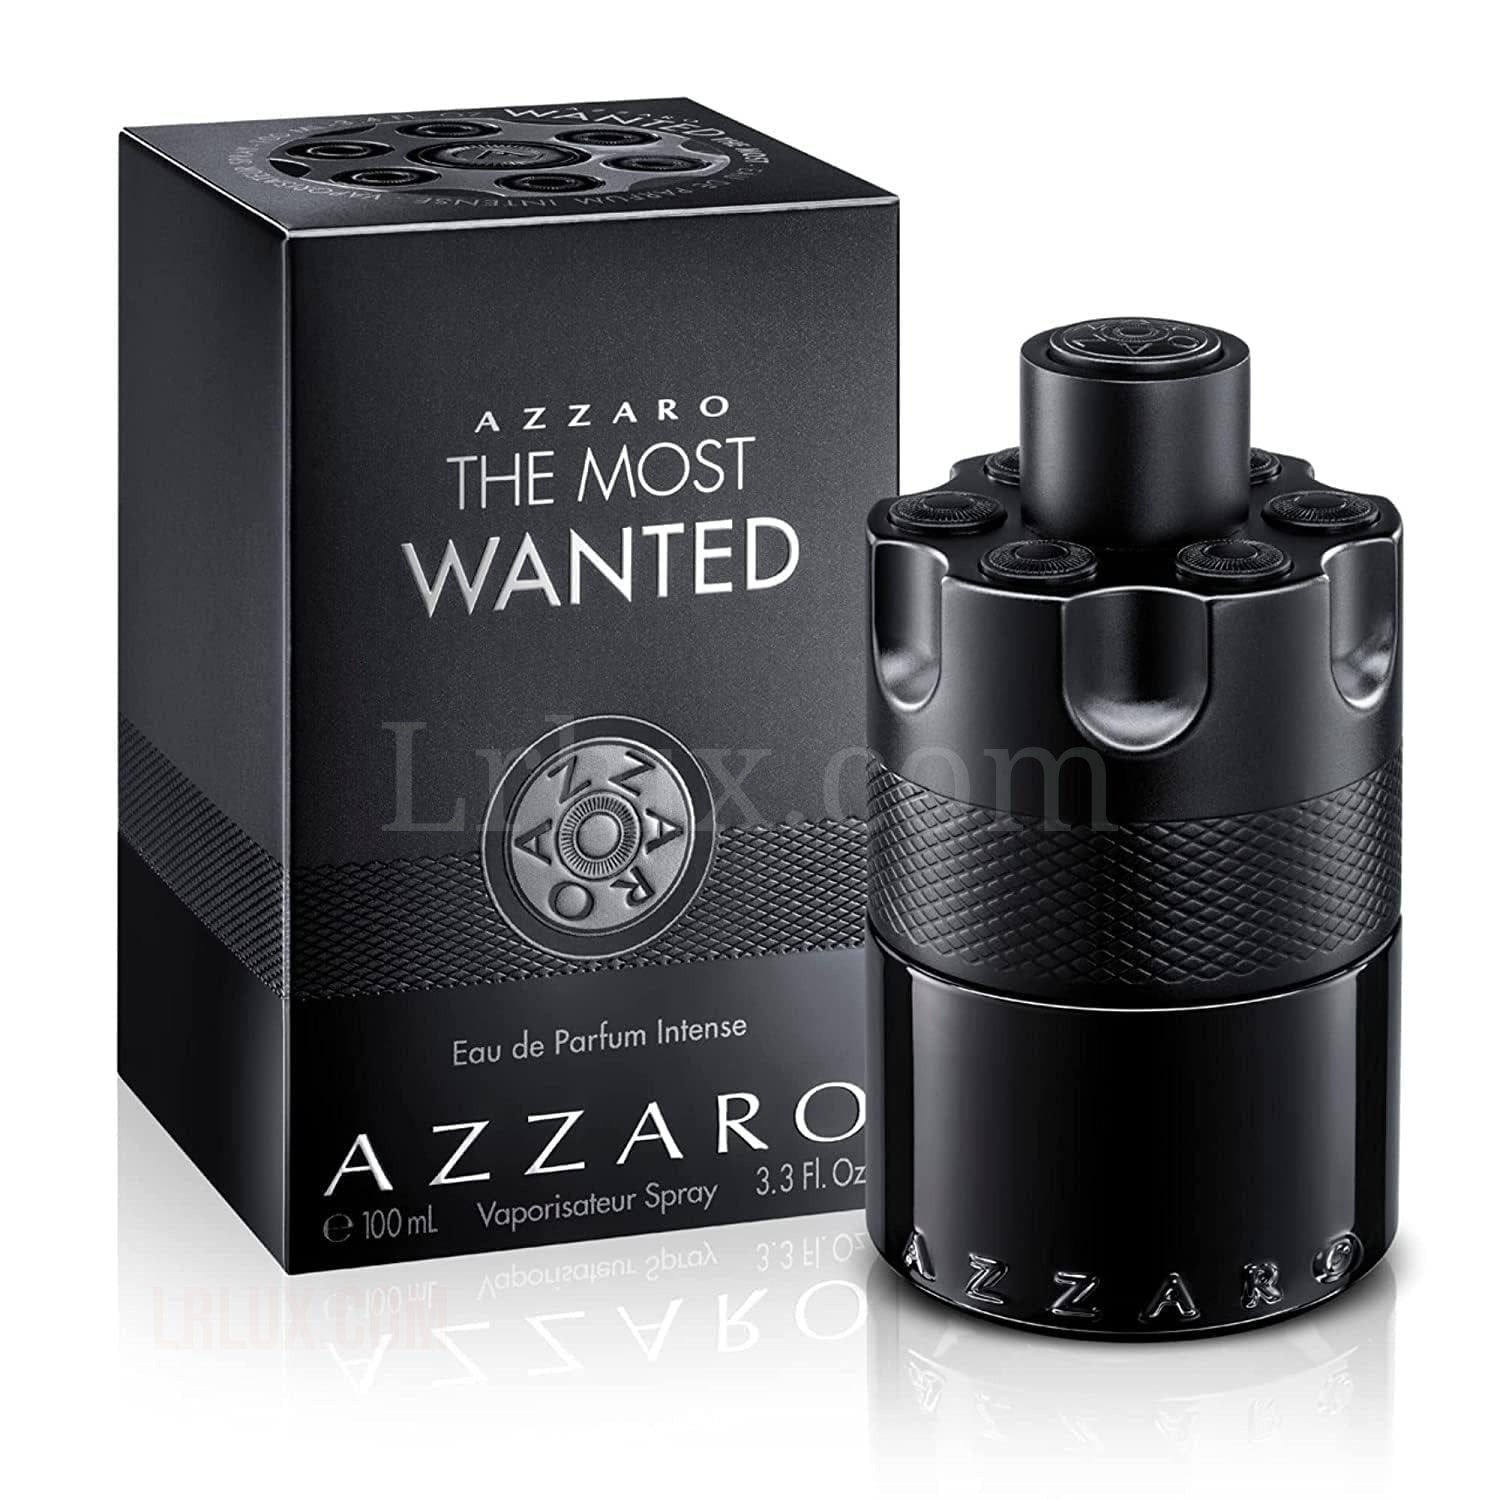 THE MOST WANTED" INTENSE By AZZARO 3.3 OZ EDP SPR - Lrlux.com